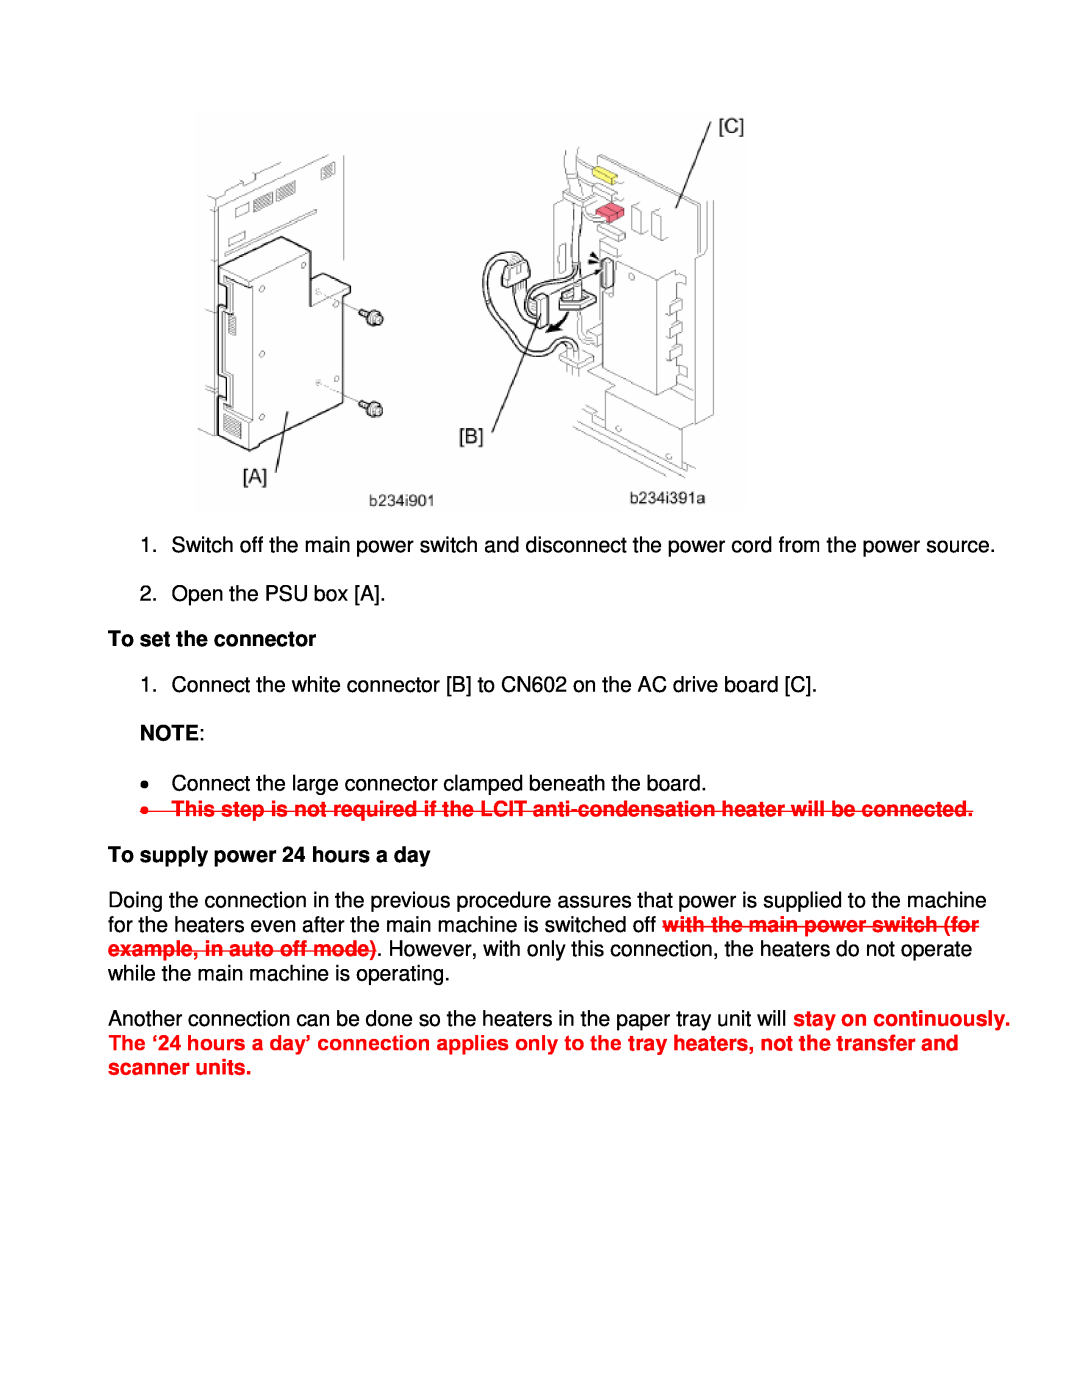 Toshiba E-STUDIO1355 service manual To set the connector, To supply power 24 hours a day 